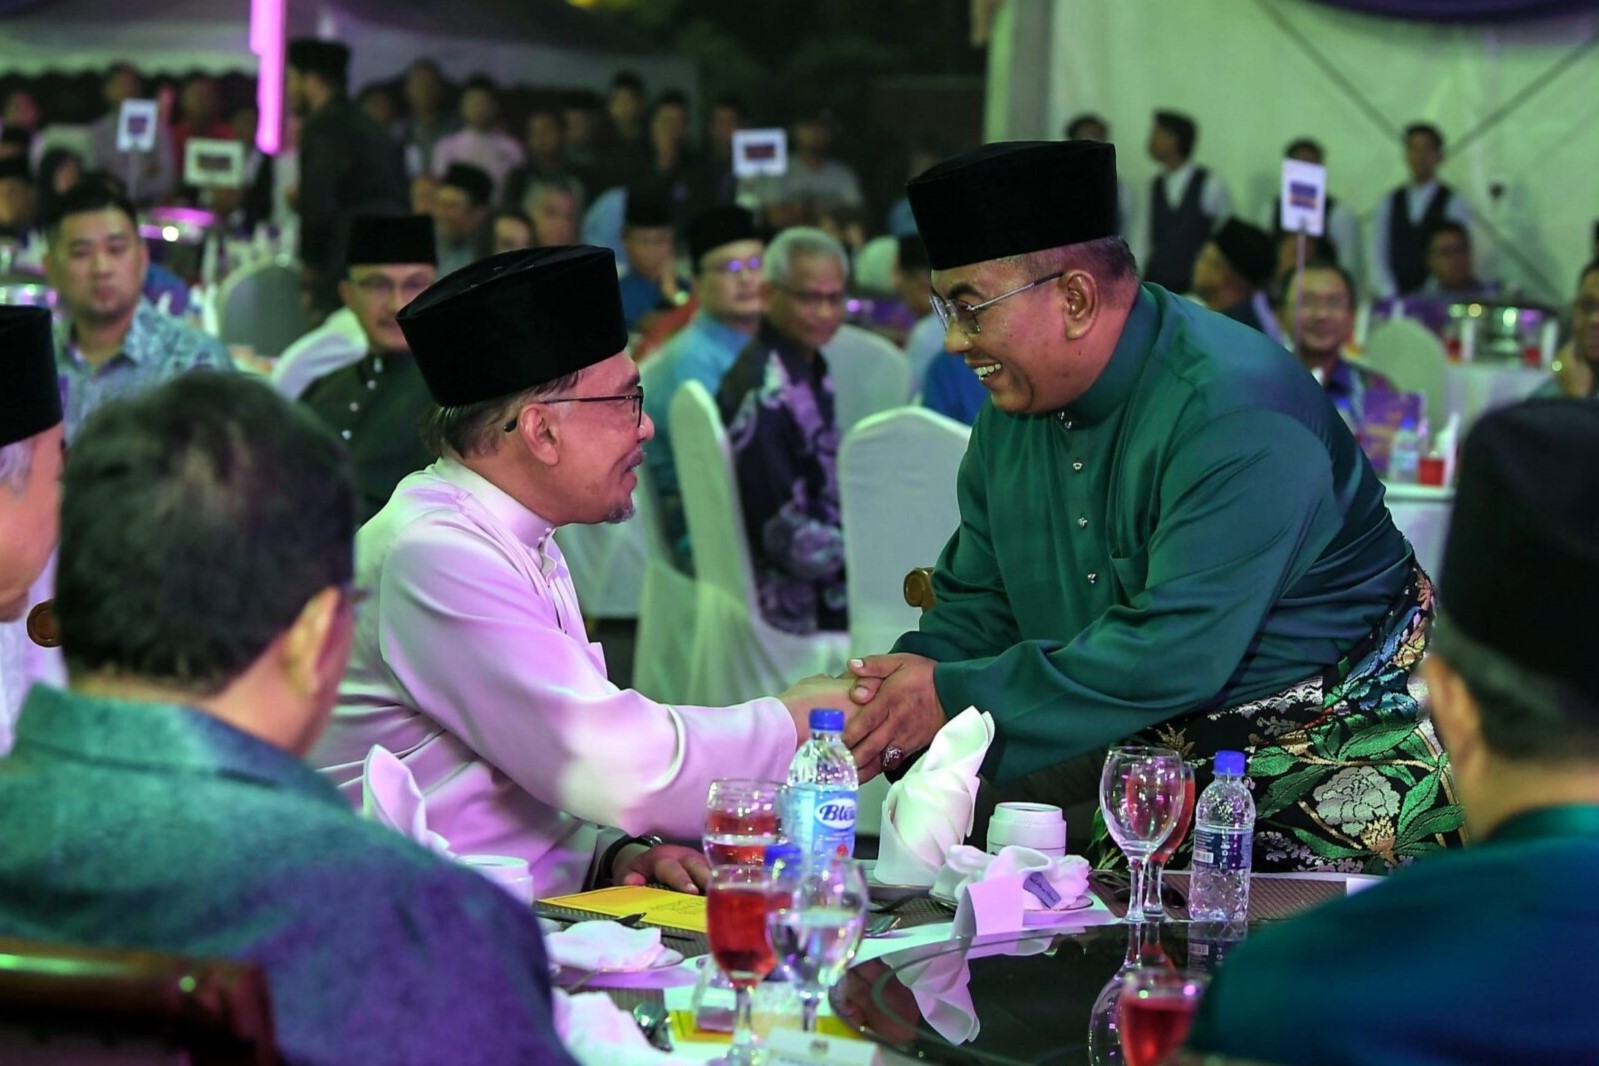 Sorry for ‘inappropriate’ remarks: Sanusi to PM, cabinet at Raya event